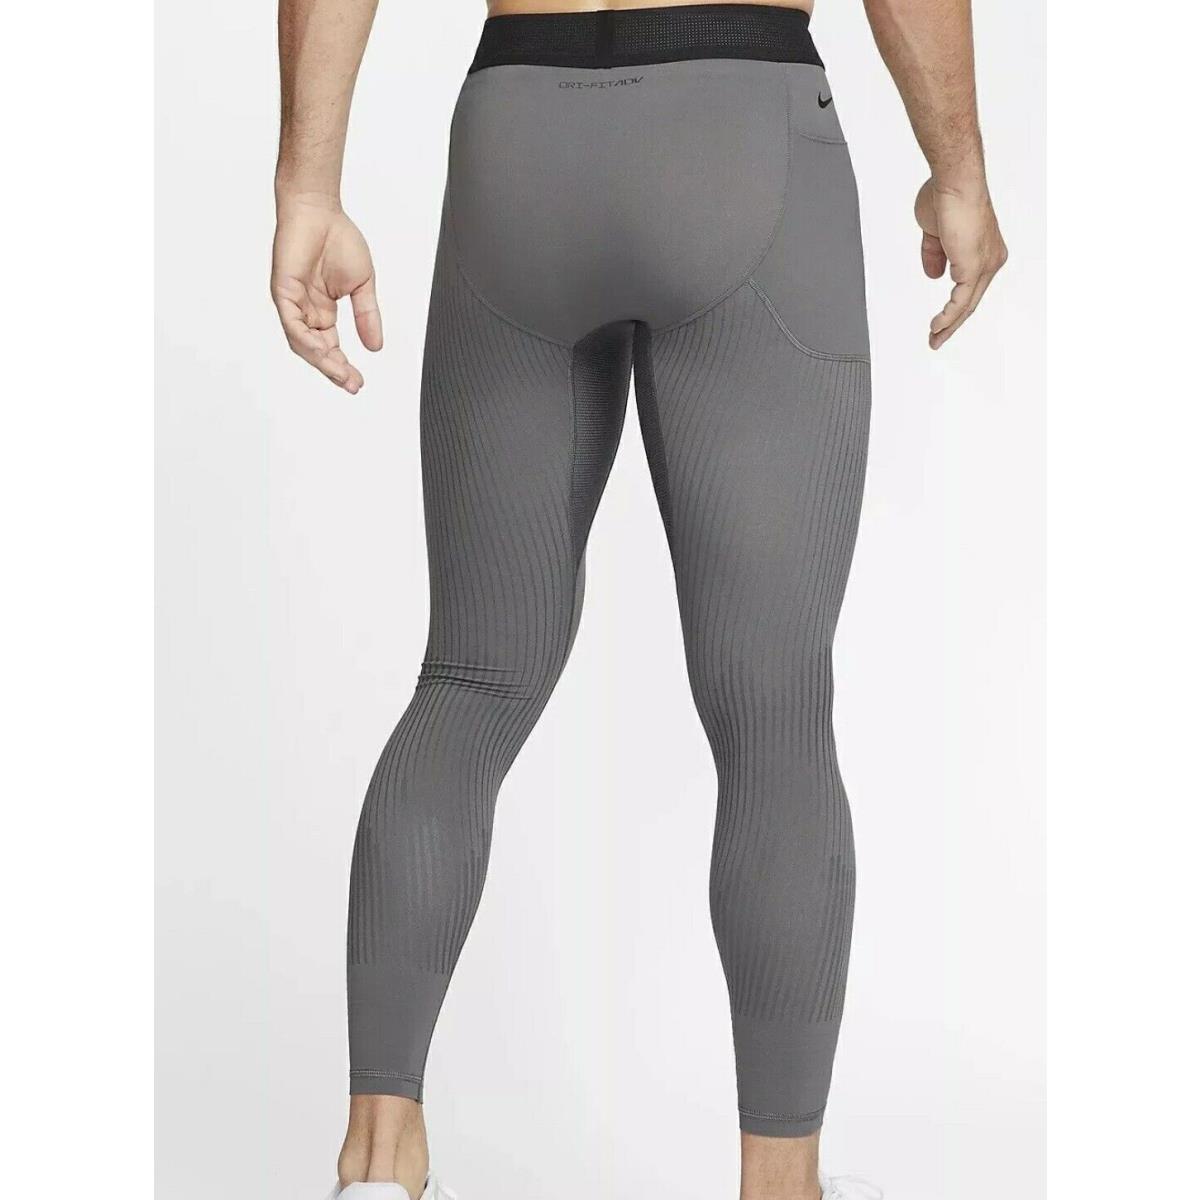 Nike A.p.s. Dri-fit Adv Iron Grey Versatile Workout Tights Mens Small DR1890-068